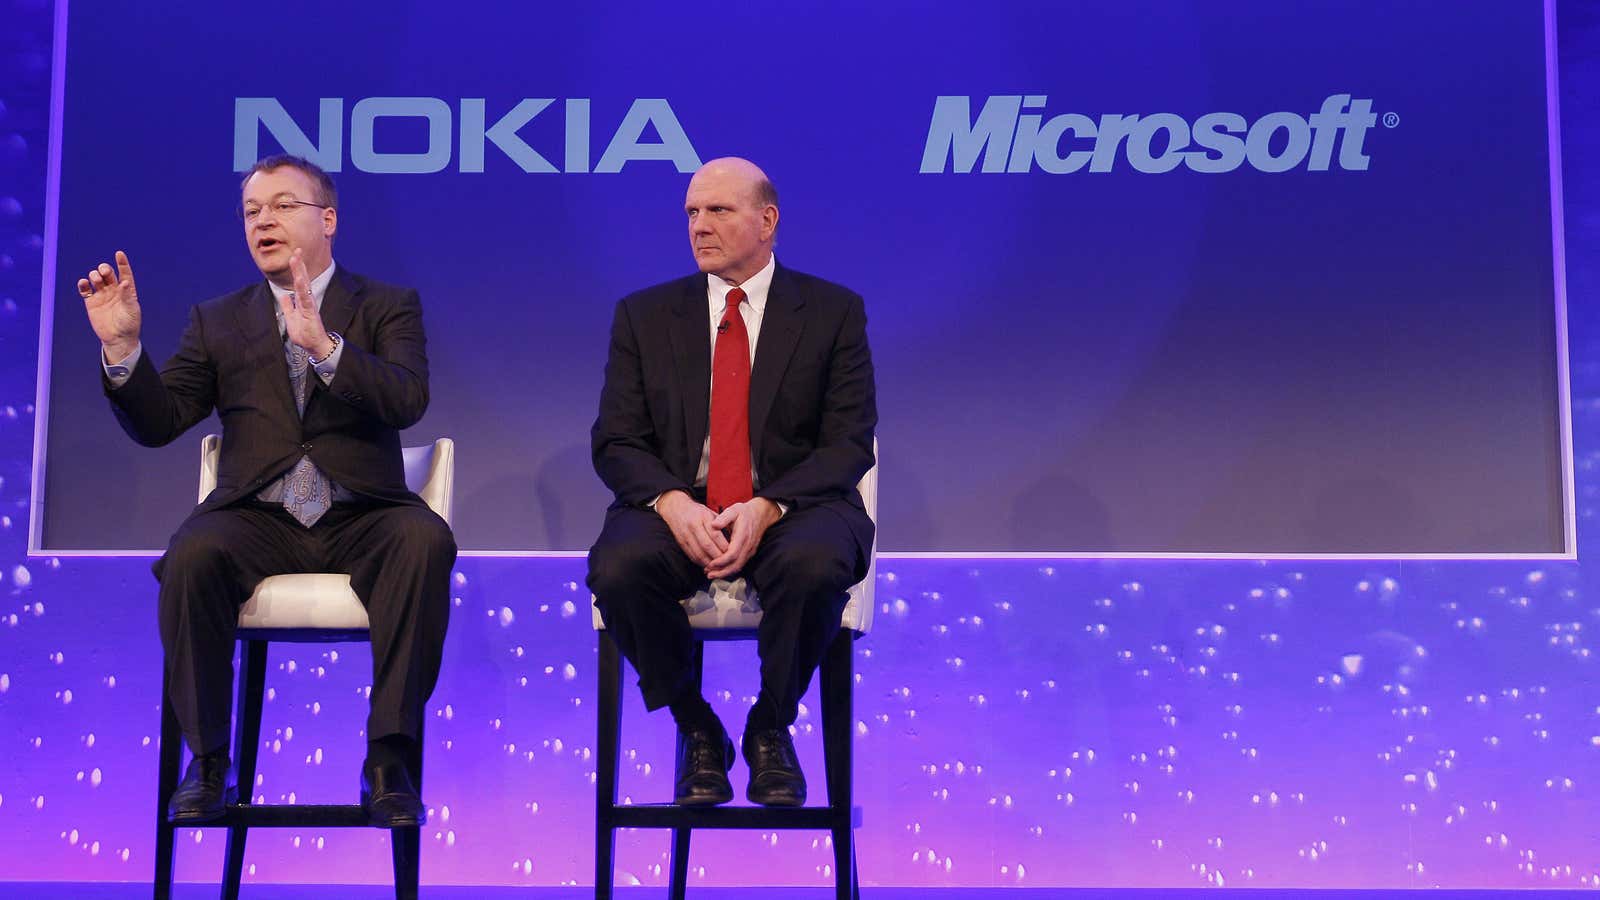 The last time Nokia and Microsoft teamed up to target a big new market, it didn’t end well.